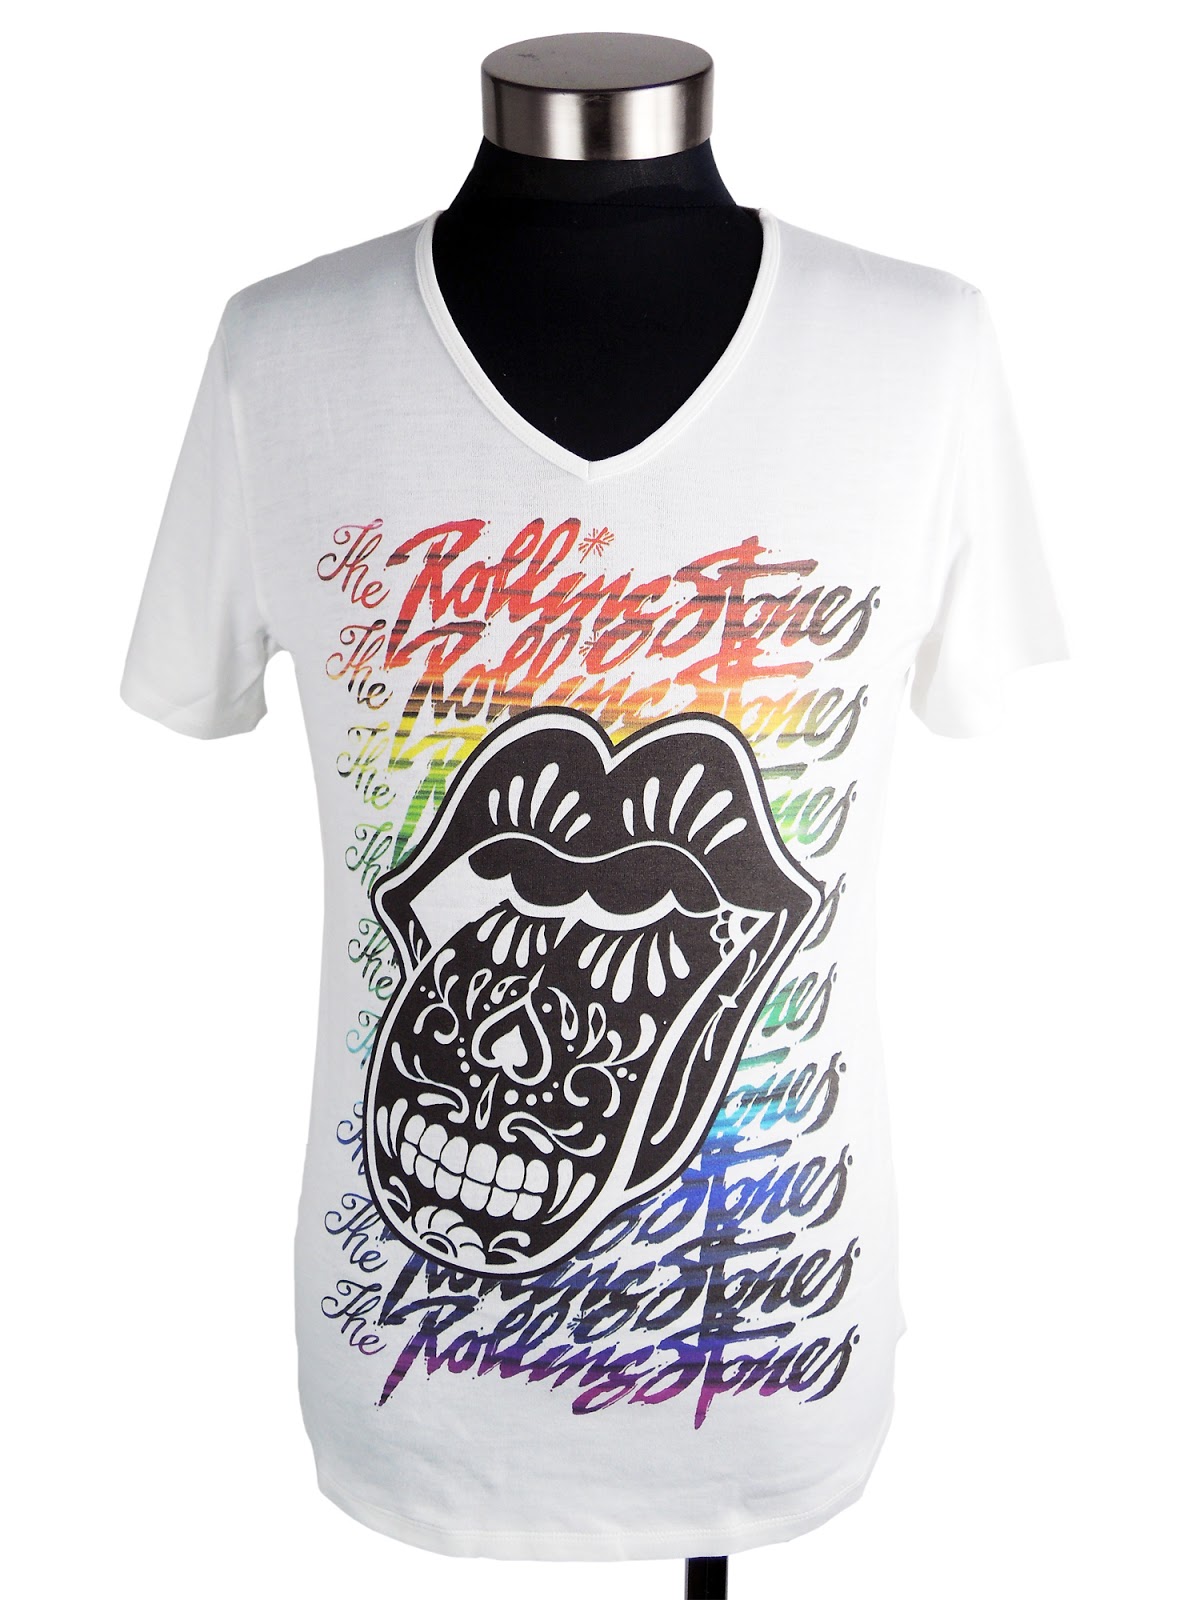 CRUCE & Co. OFFICIAL BLOG: The Rolling Stones × CRUCE & Co. × ArtDeli